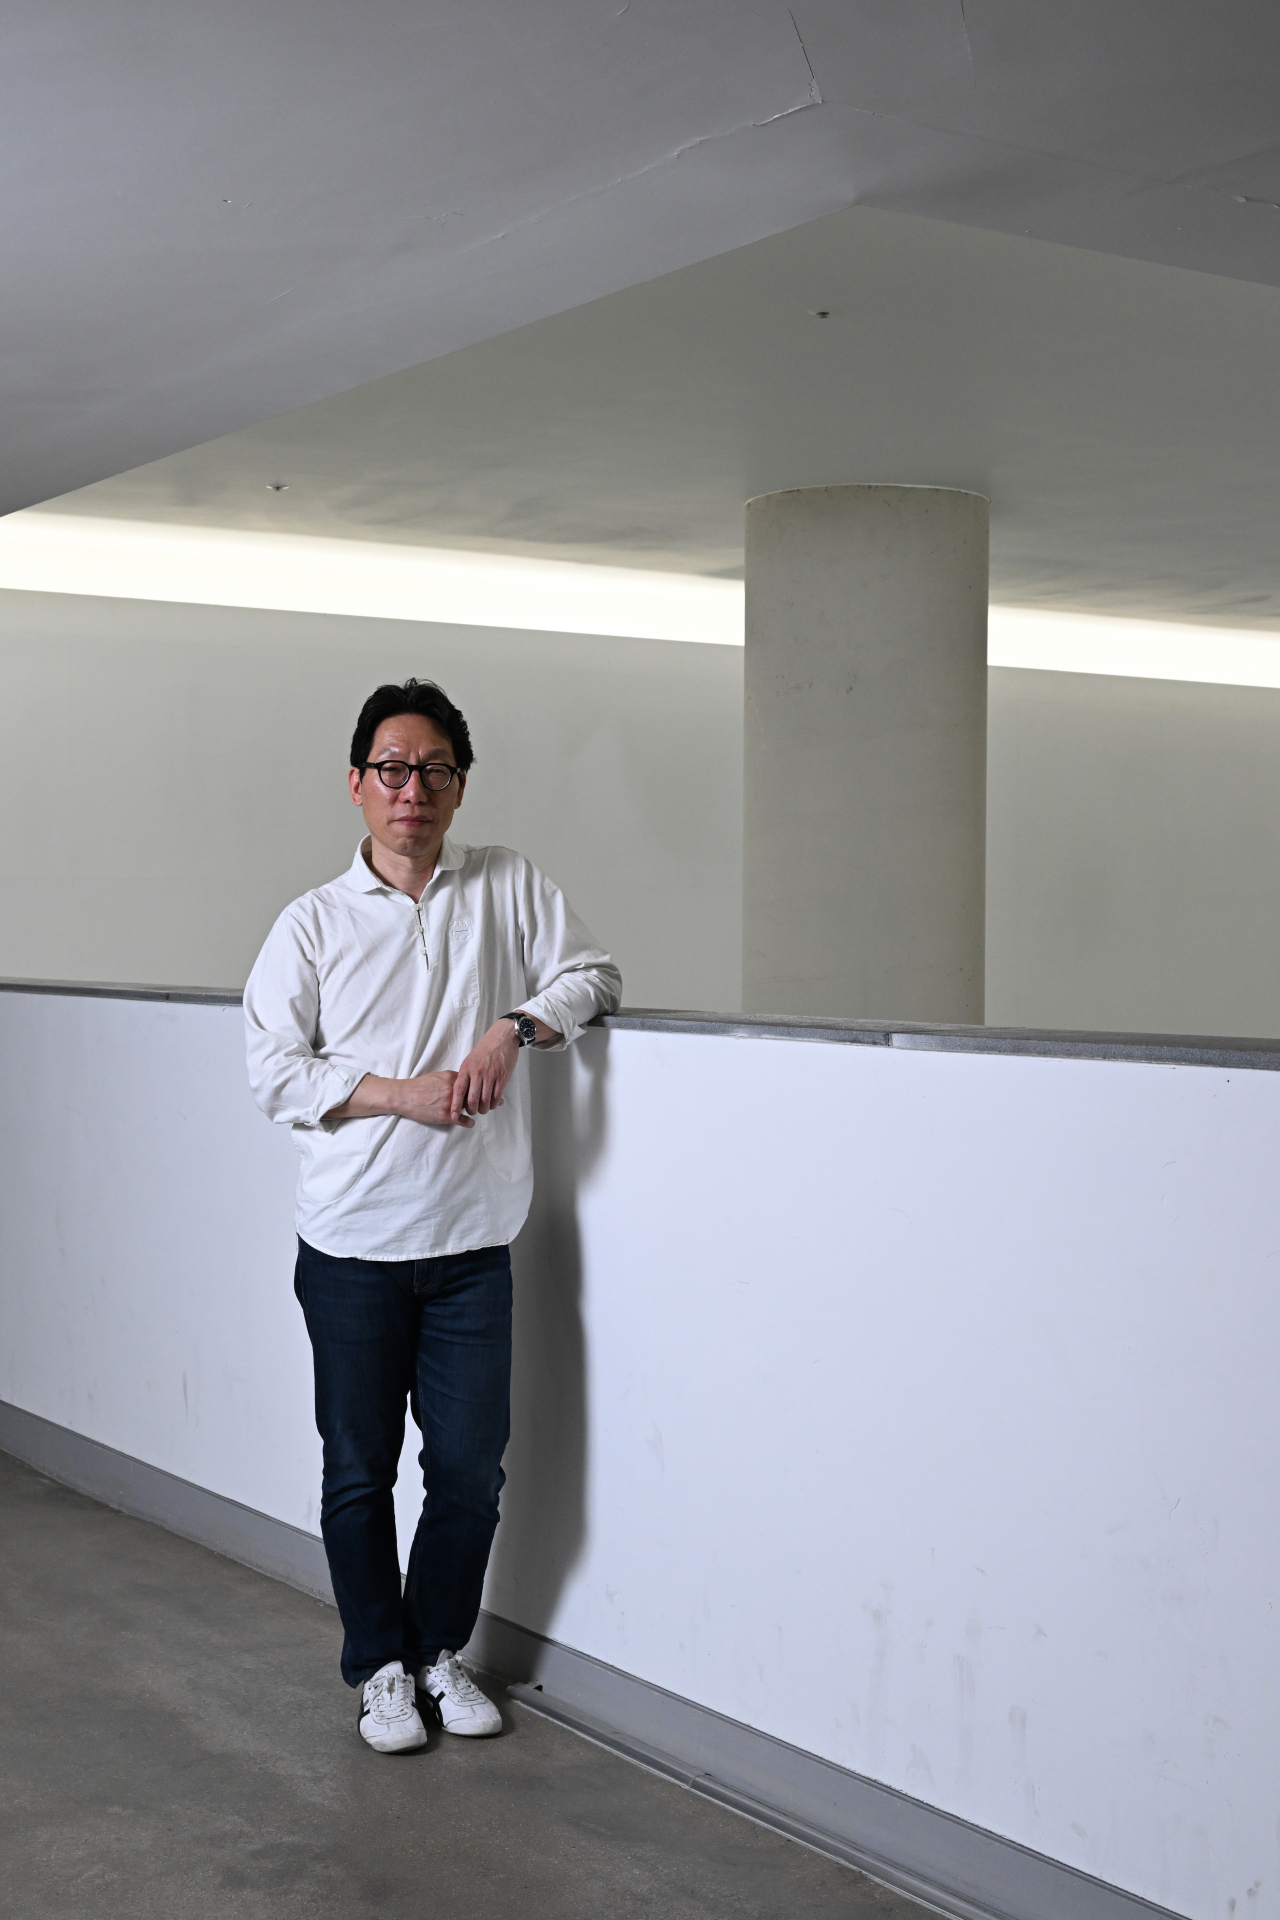 Architect Kim Soo-young, the designer of Yeongju Swimming Pool, poses for a photo on May 31. (Im Se-jun/The Korea Herald)